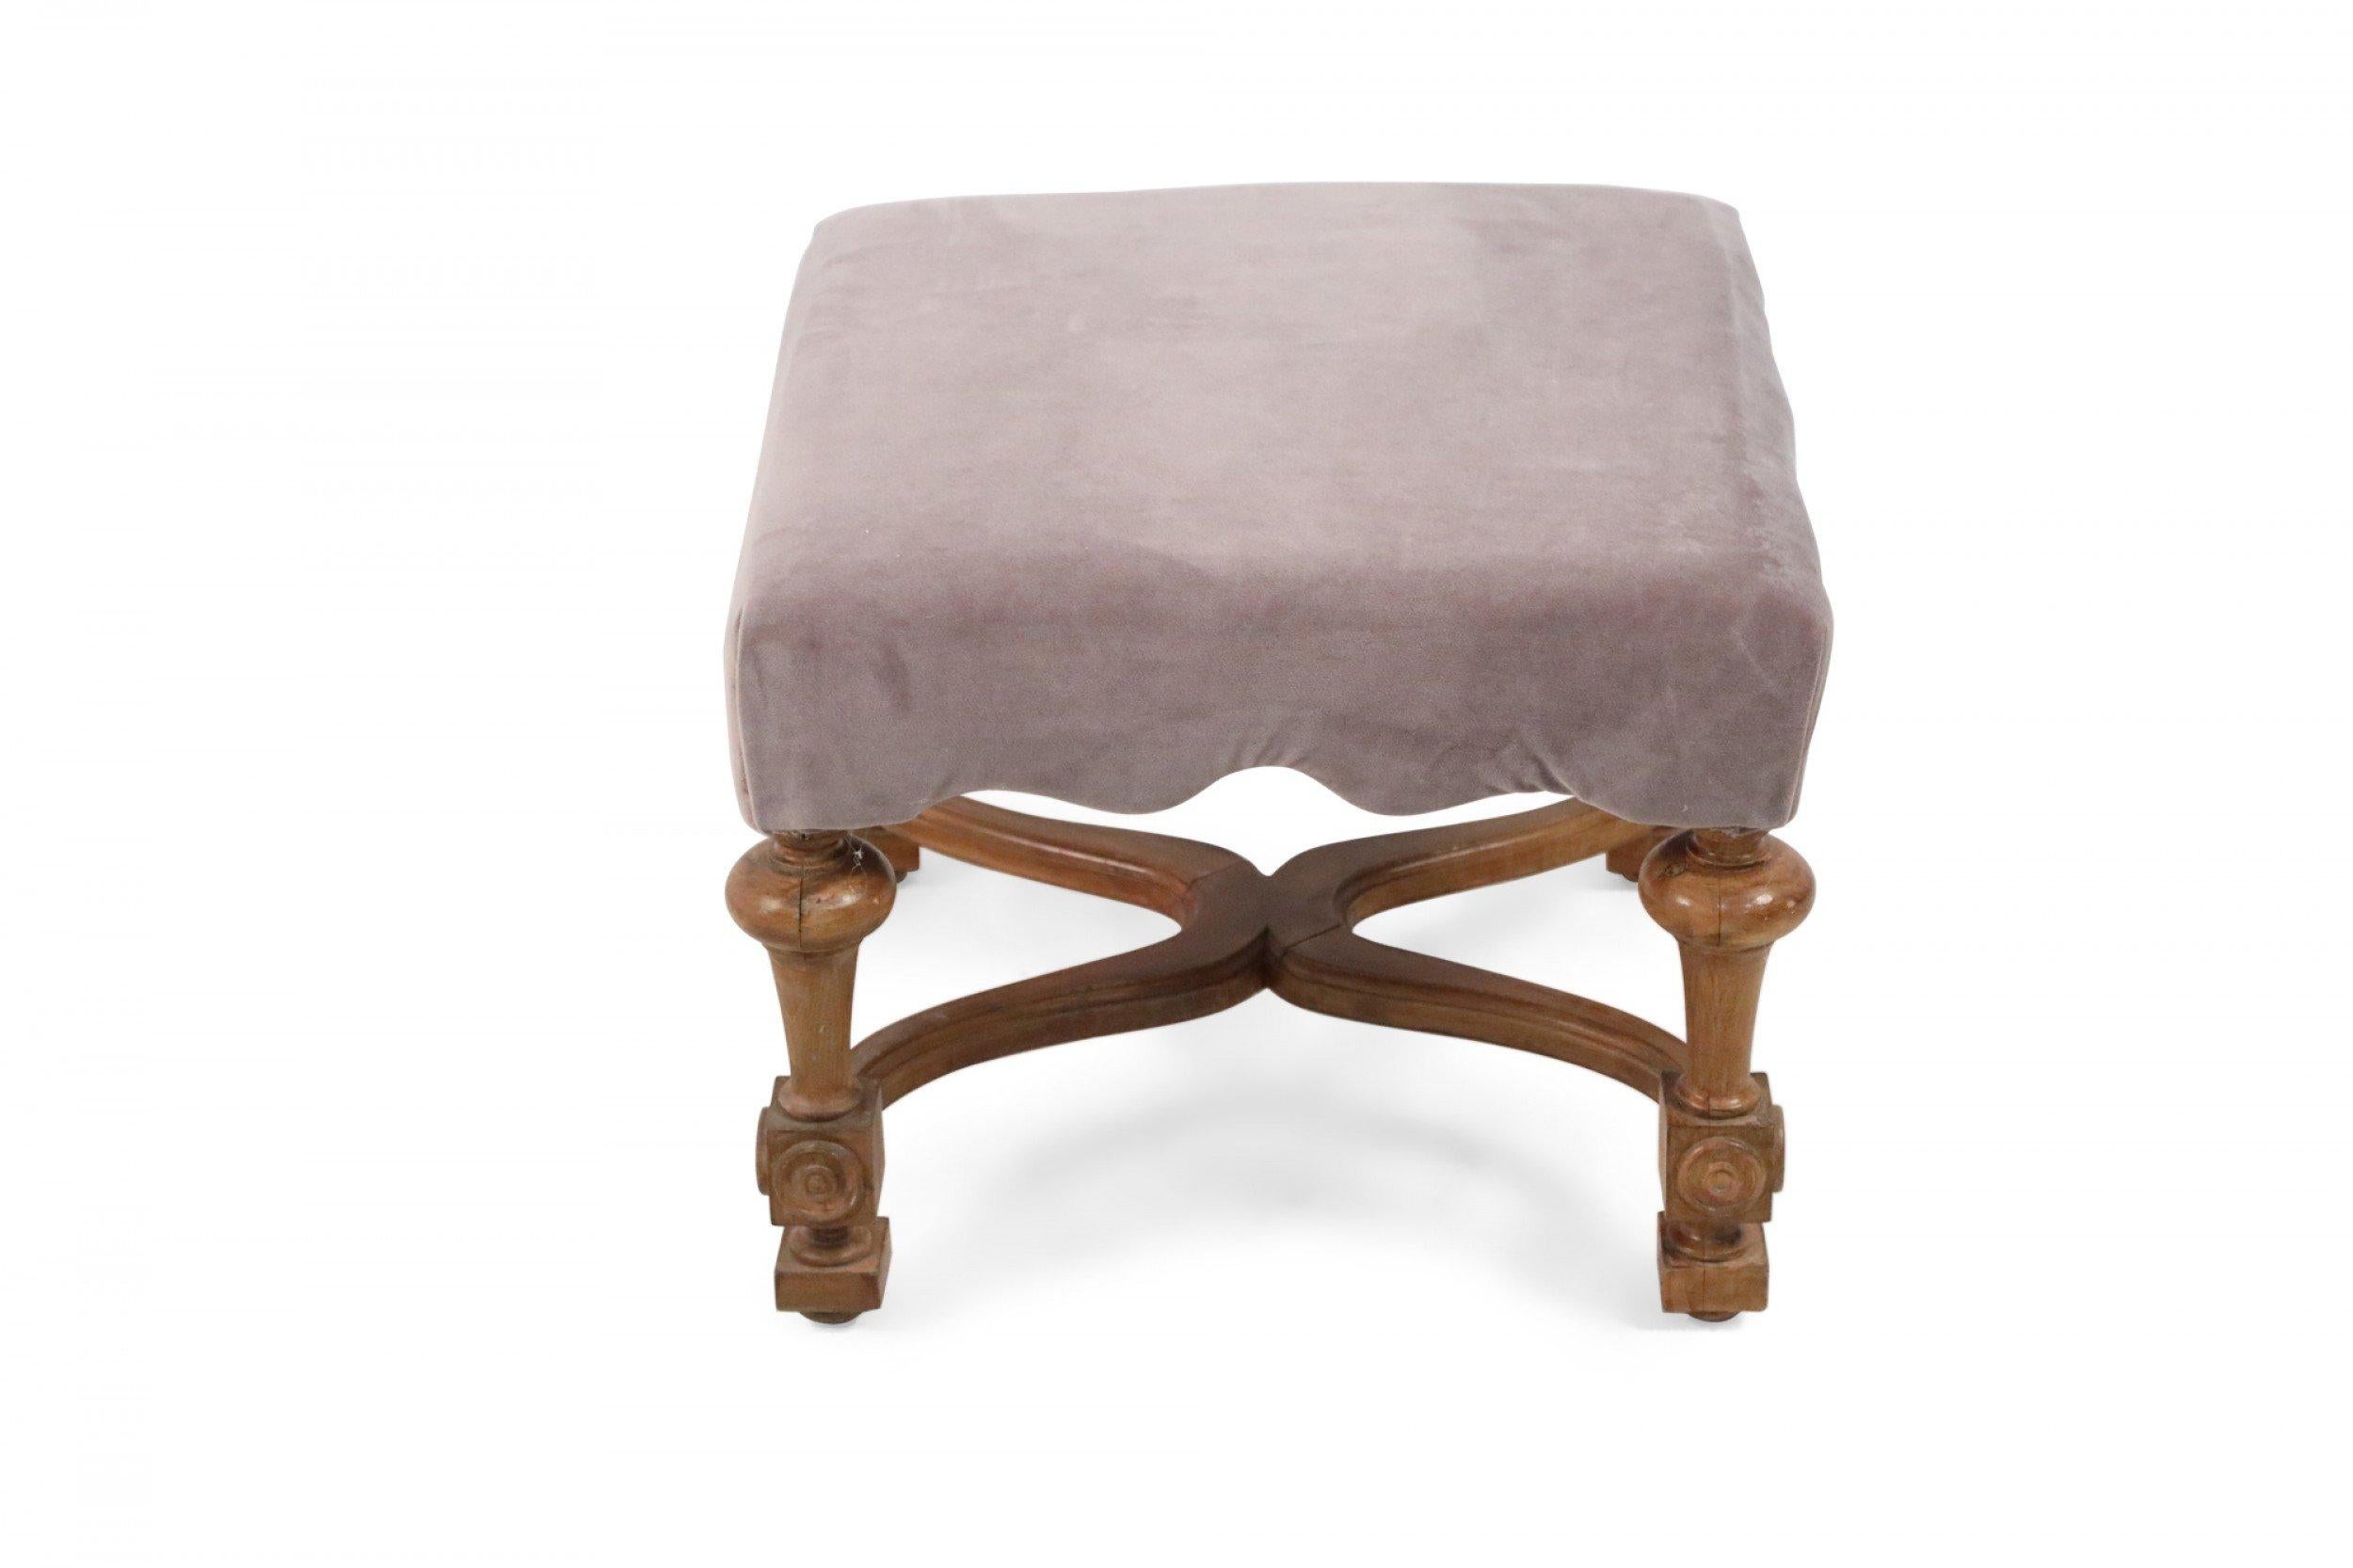 Swedish Gustavian-style footstool combining a scalloped top upholstered in mauve velvet with a curved oak x-stretcher carved with decorative medallions.
   